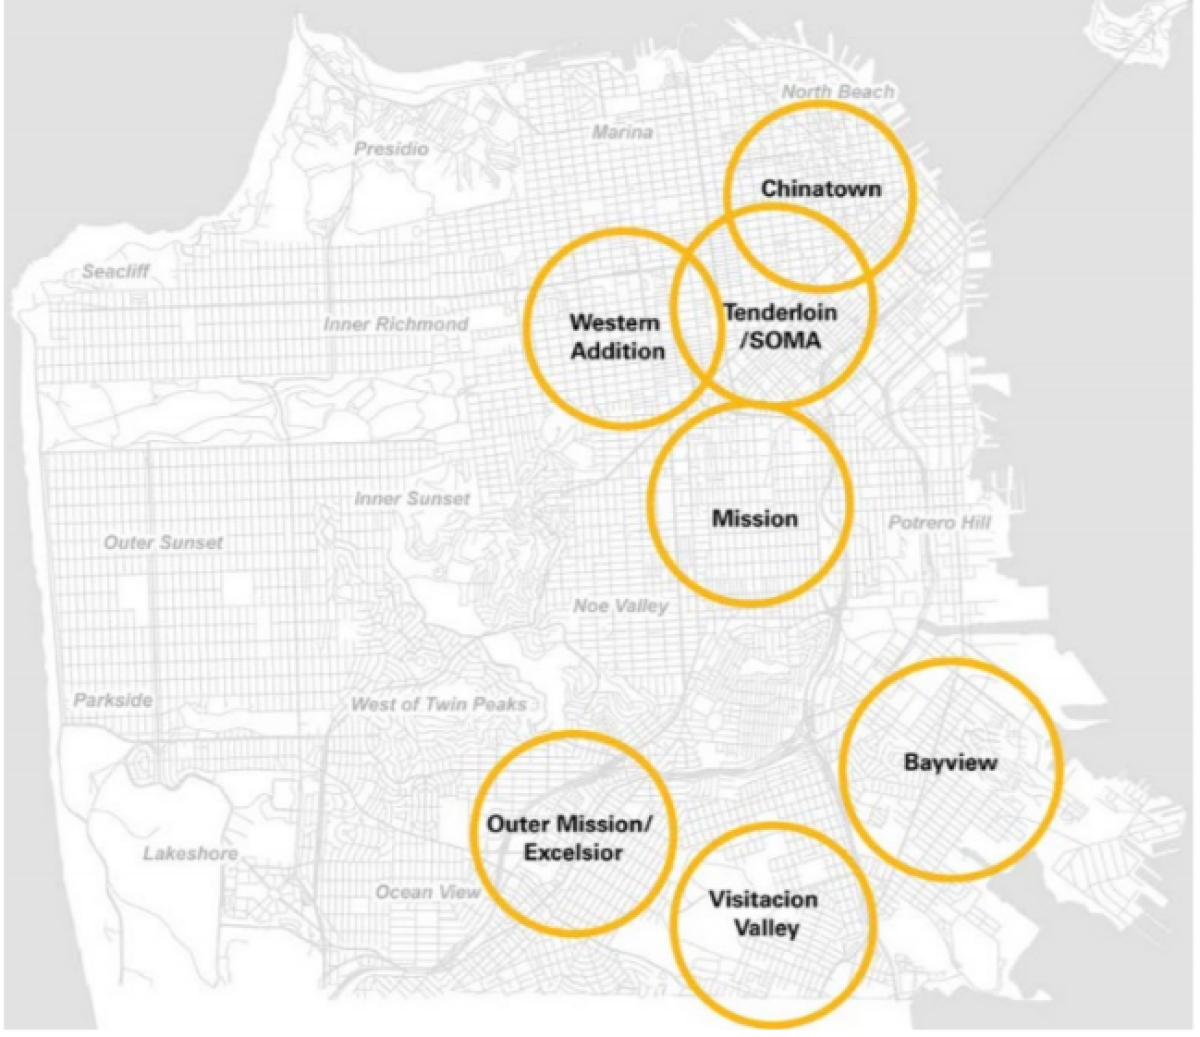 The San Francisco Municipal Transportation Agency has laid out a number of communities of concern, or areas where many low-income people of color do not have easy access to e-scooters.